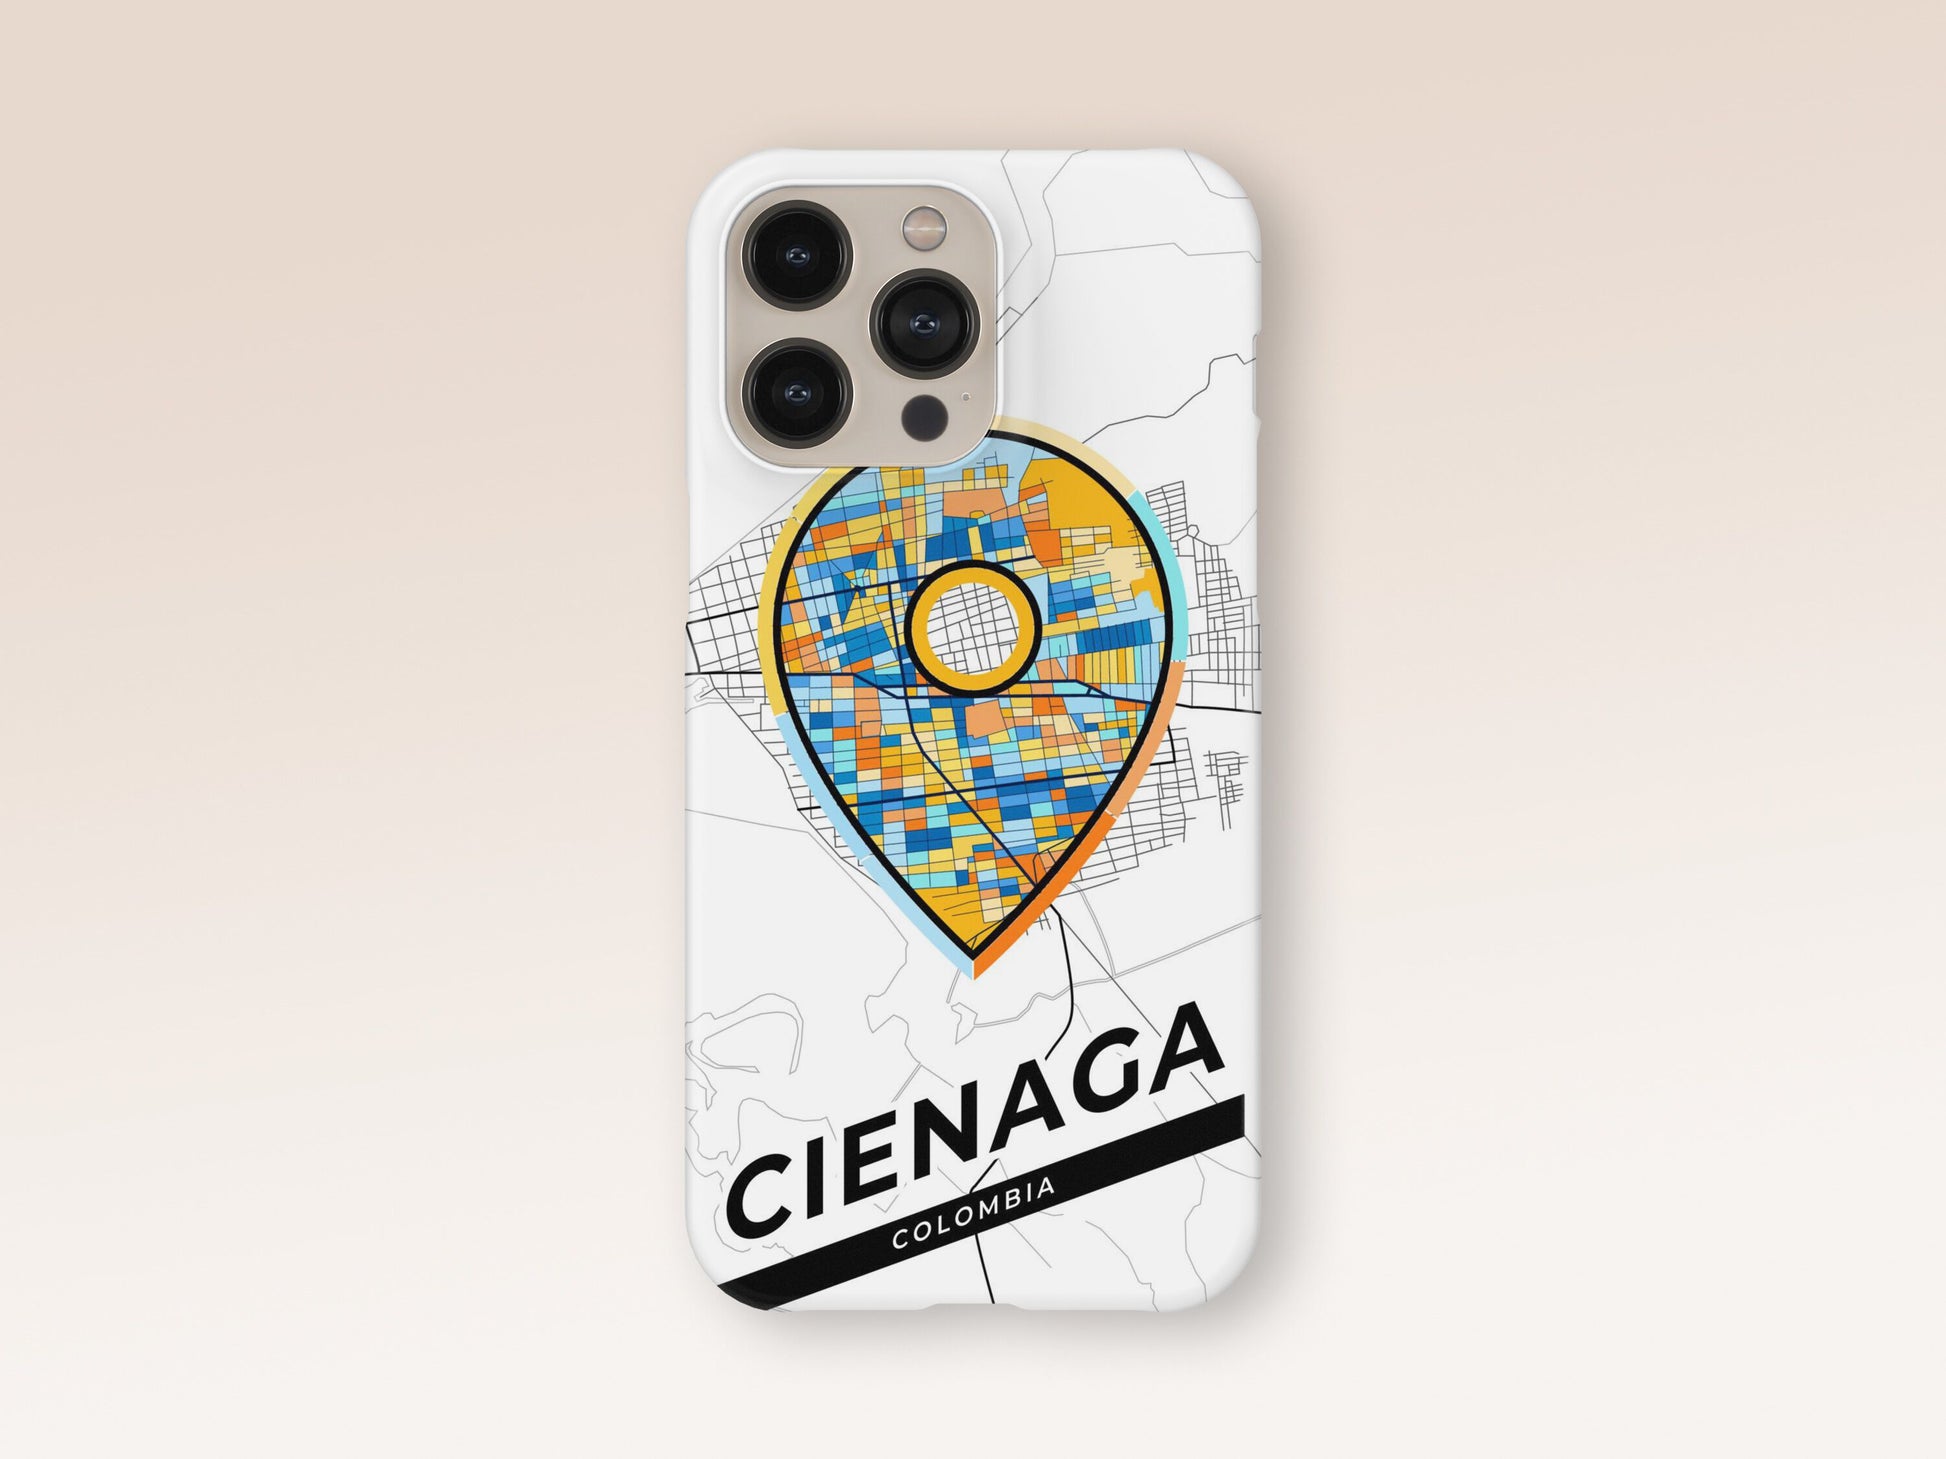 Cienaga Colombia slim phone case with colorful icon. Birthday, wedding or housewarming gift. Couple match cases. 1